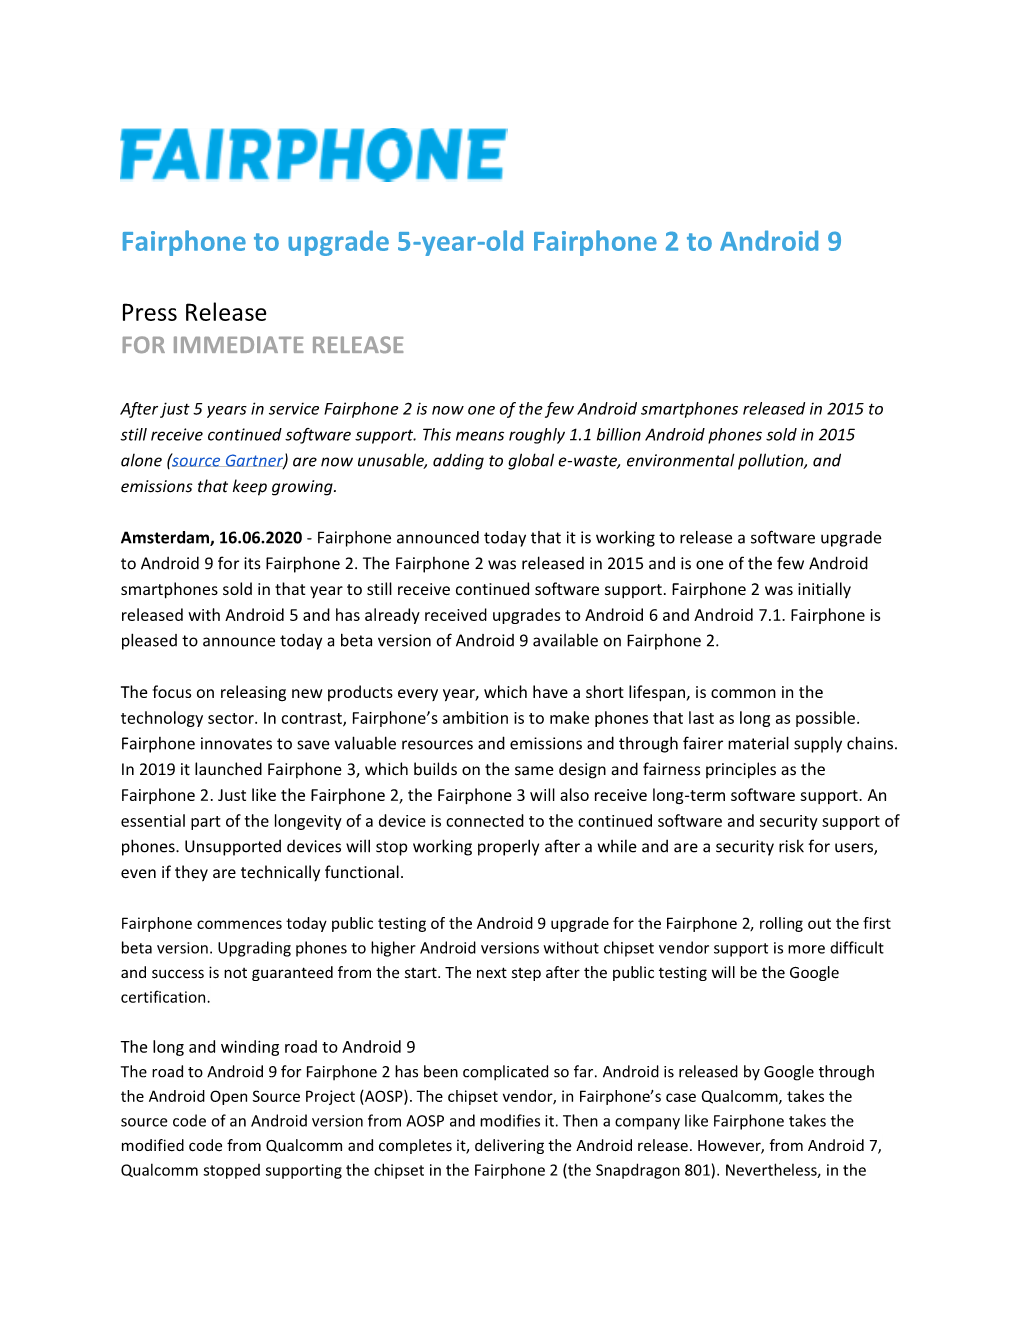 Fairphone to Upgrade 5-Year-Old Fairphone 2 to Android 9